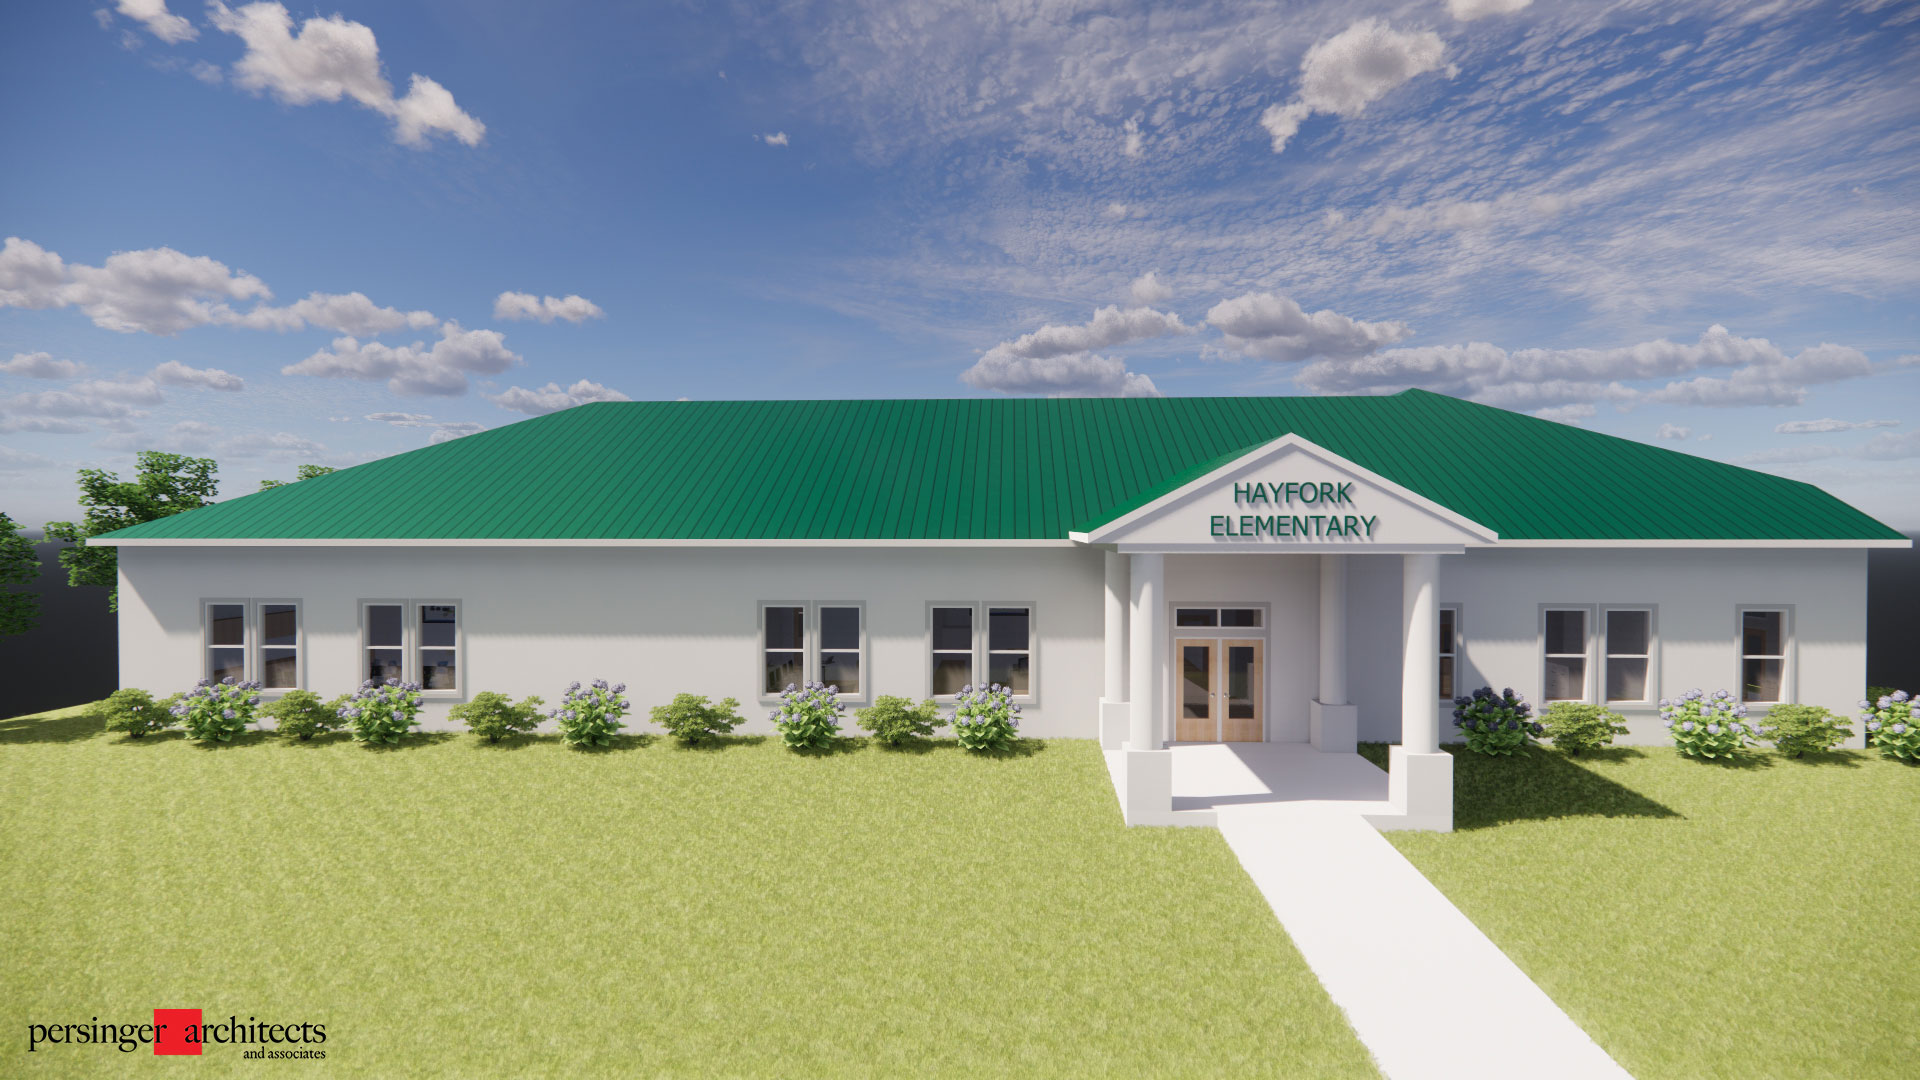 Rendering of school exterior, with 'Hayfork Elementary' in 3D text above entry.